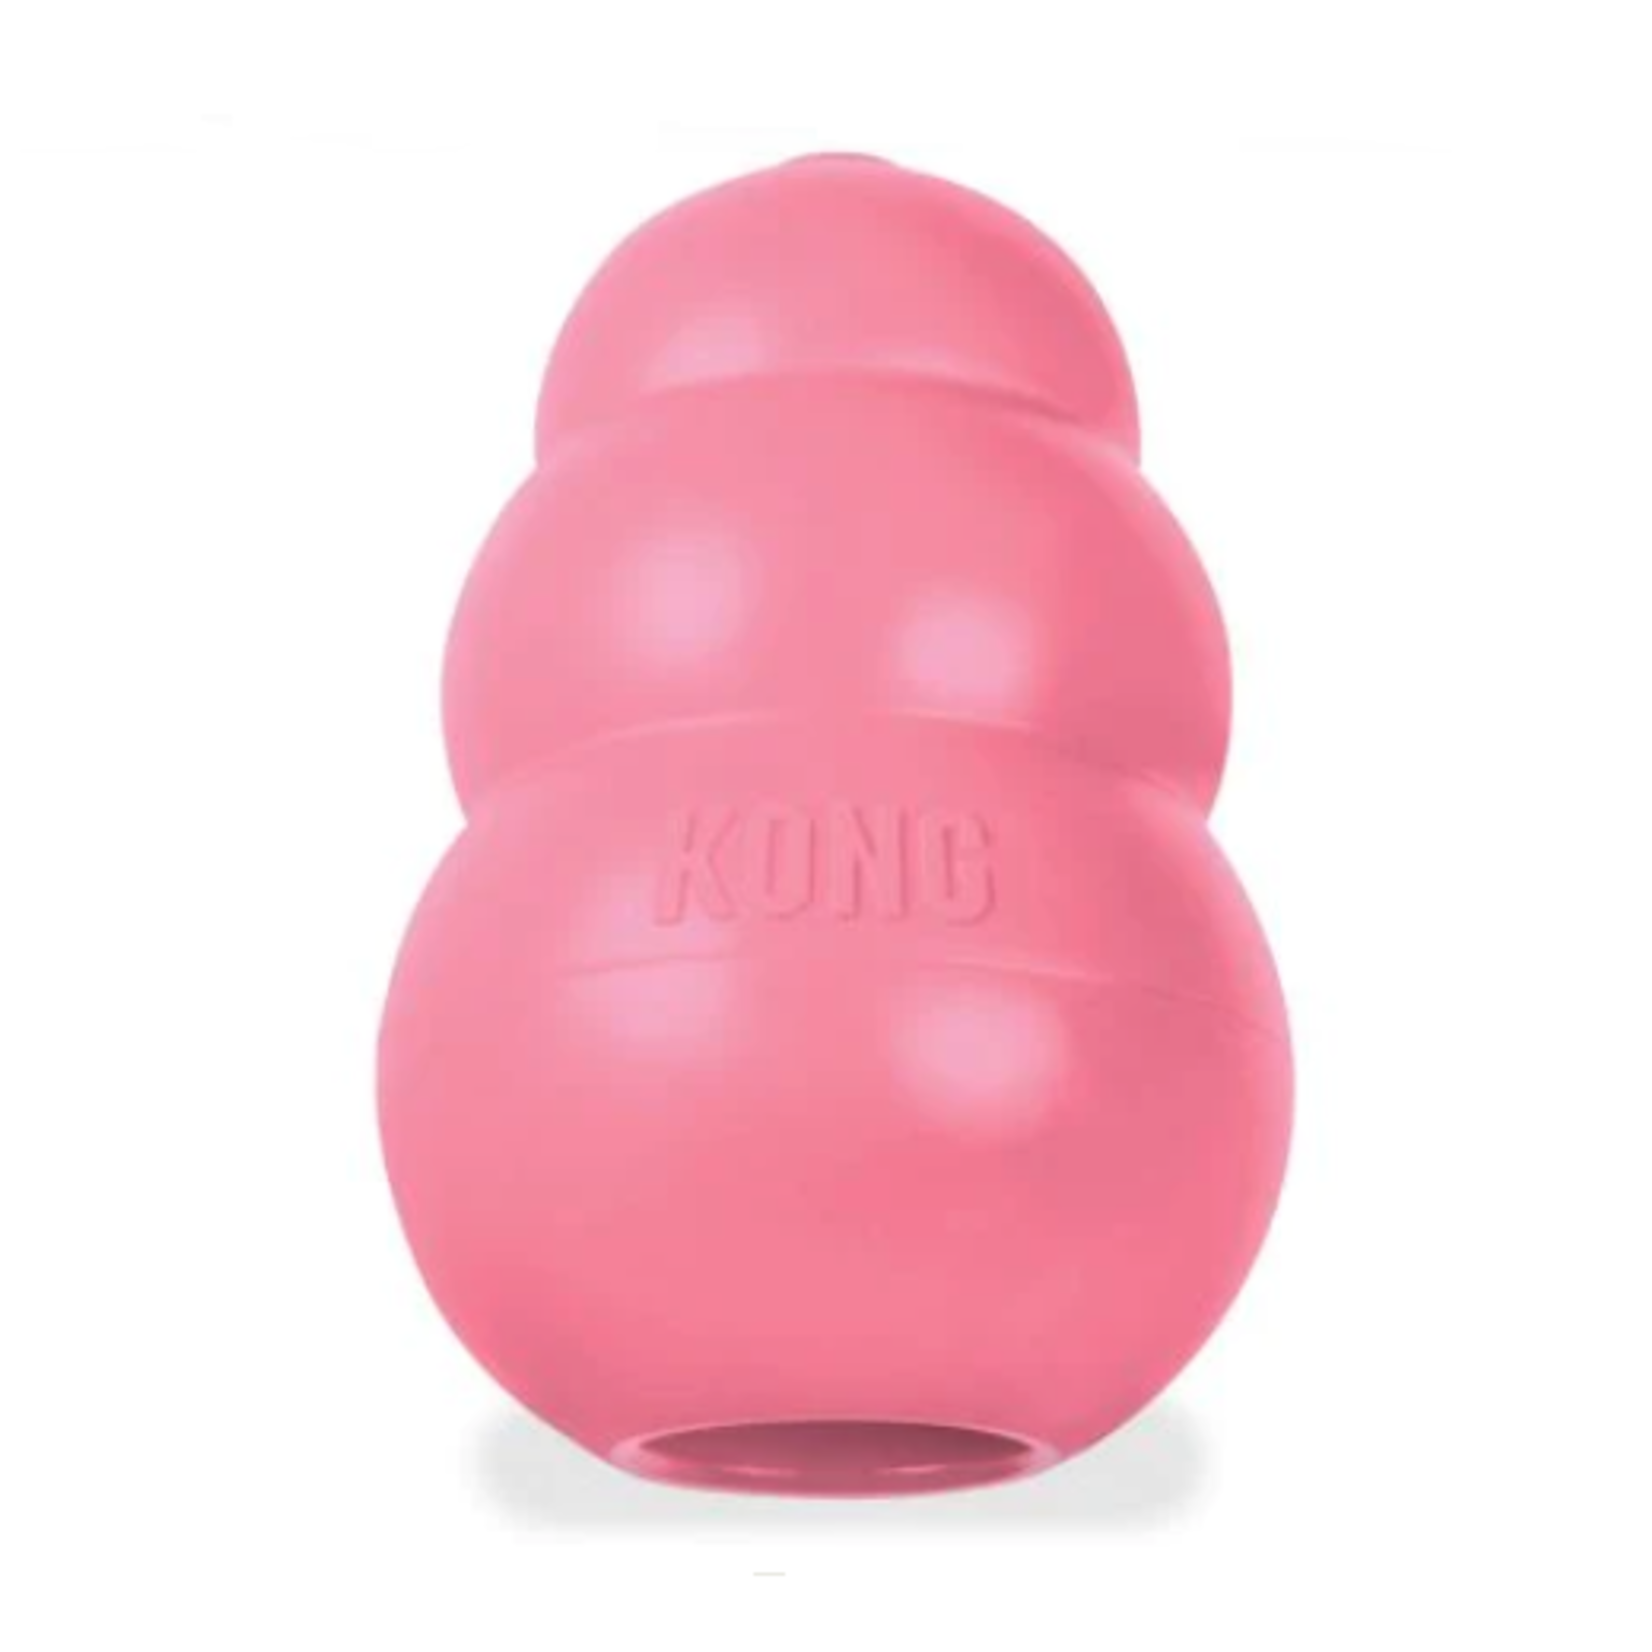 Kong Puppy Small Dog Toy - Small - Pink